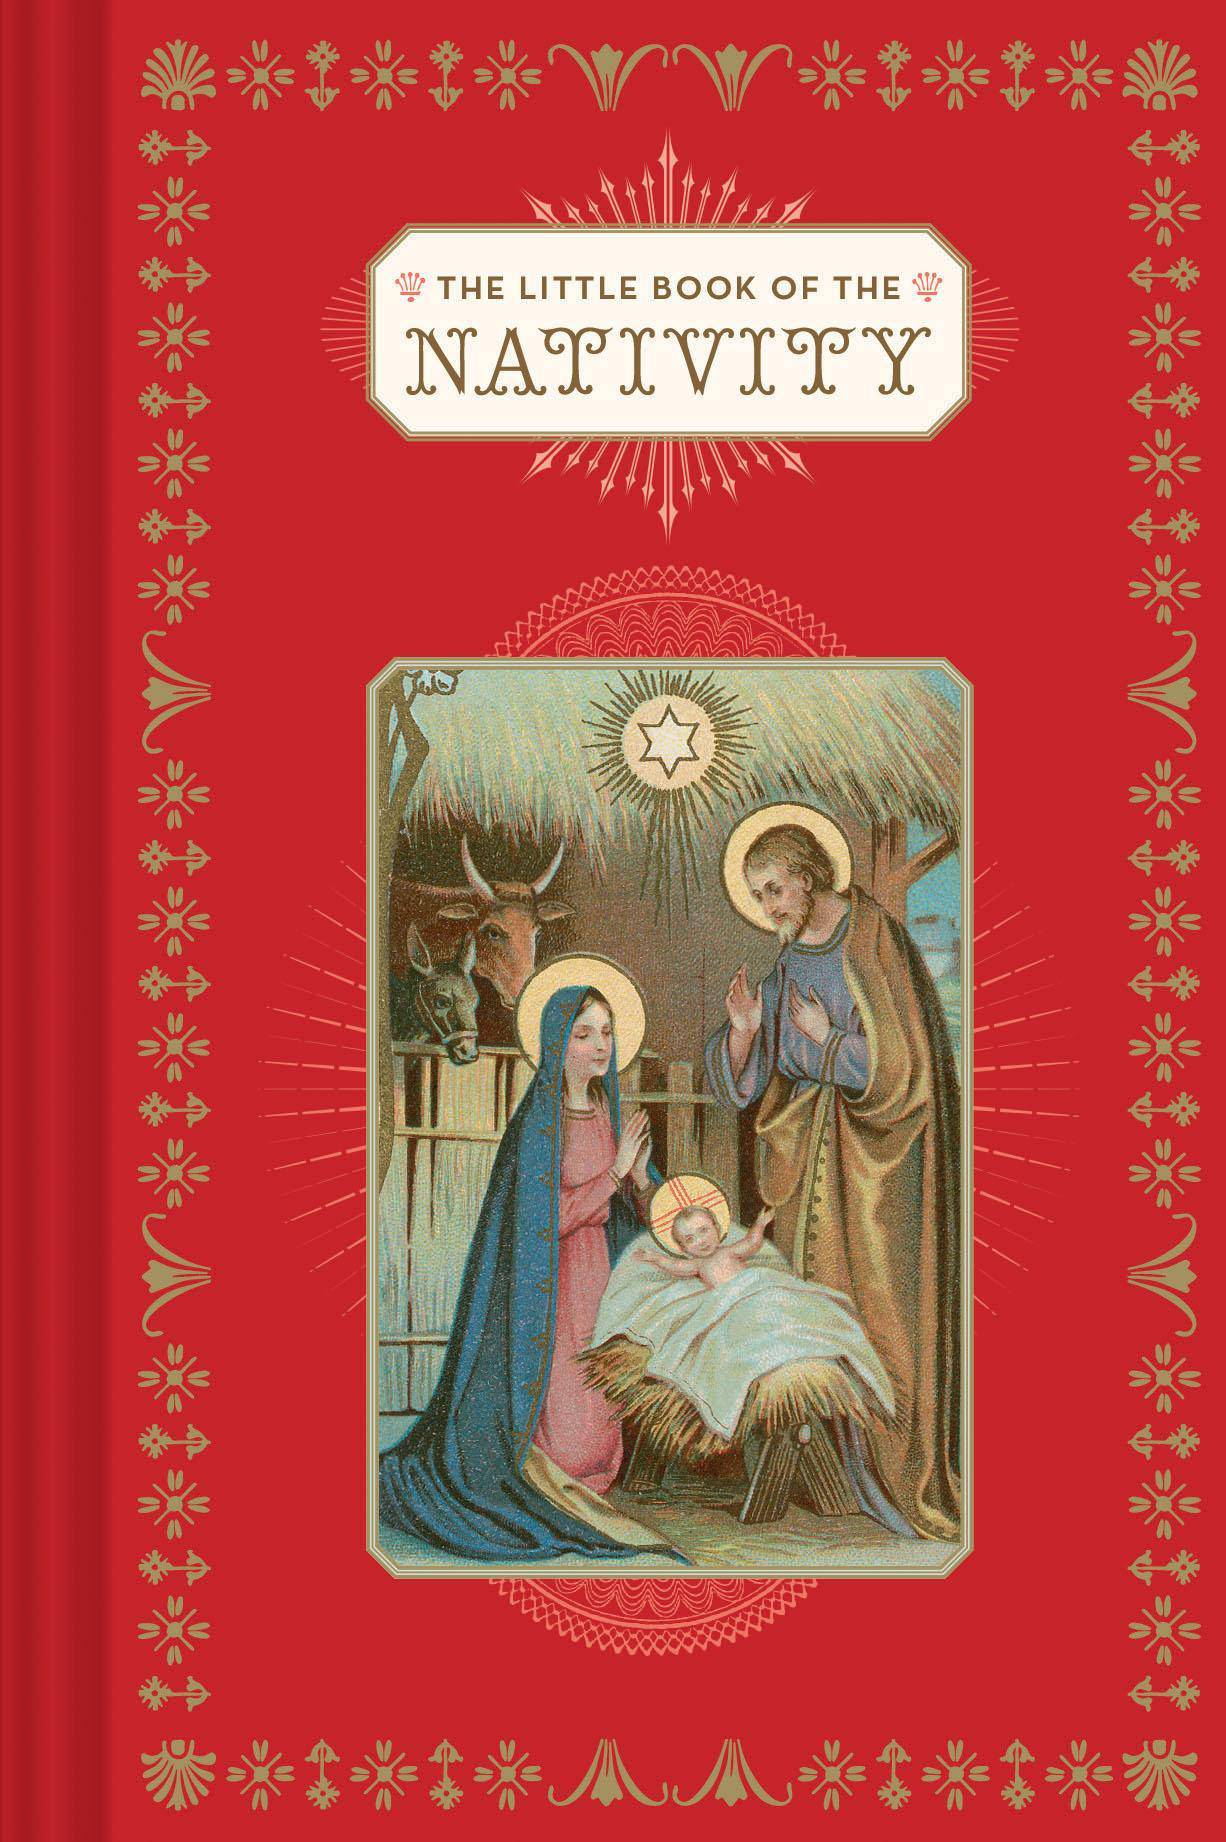 Arcadia Publishing - The Little Book of the Nativity - Little Miss Muffin Children & Home